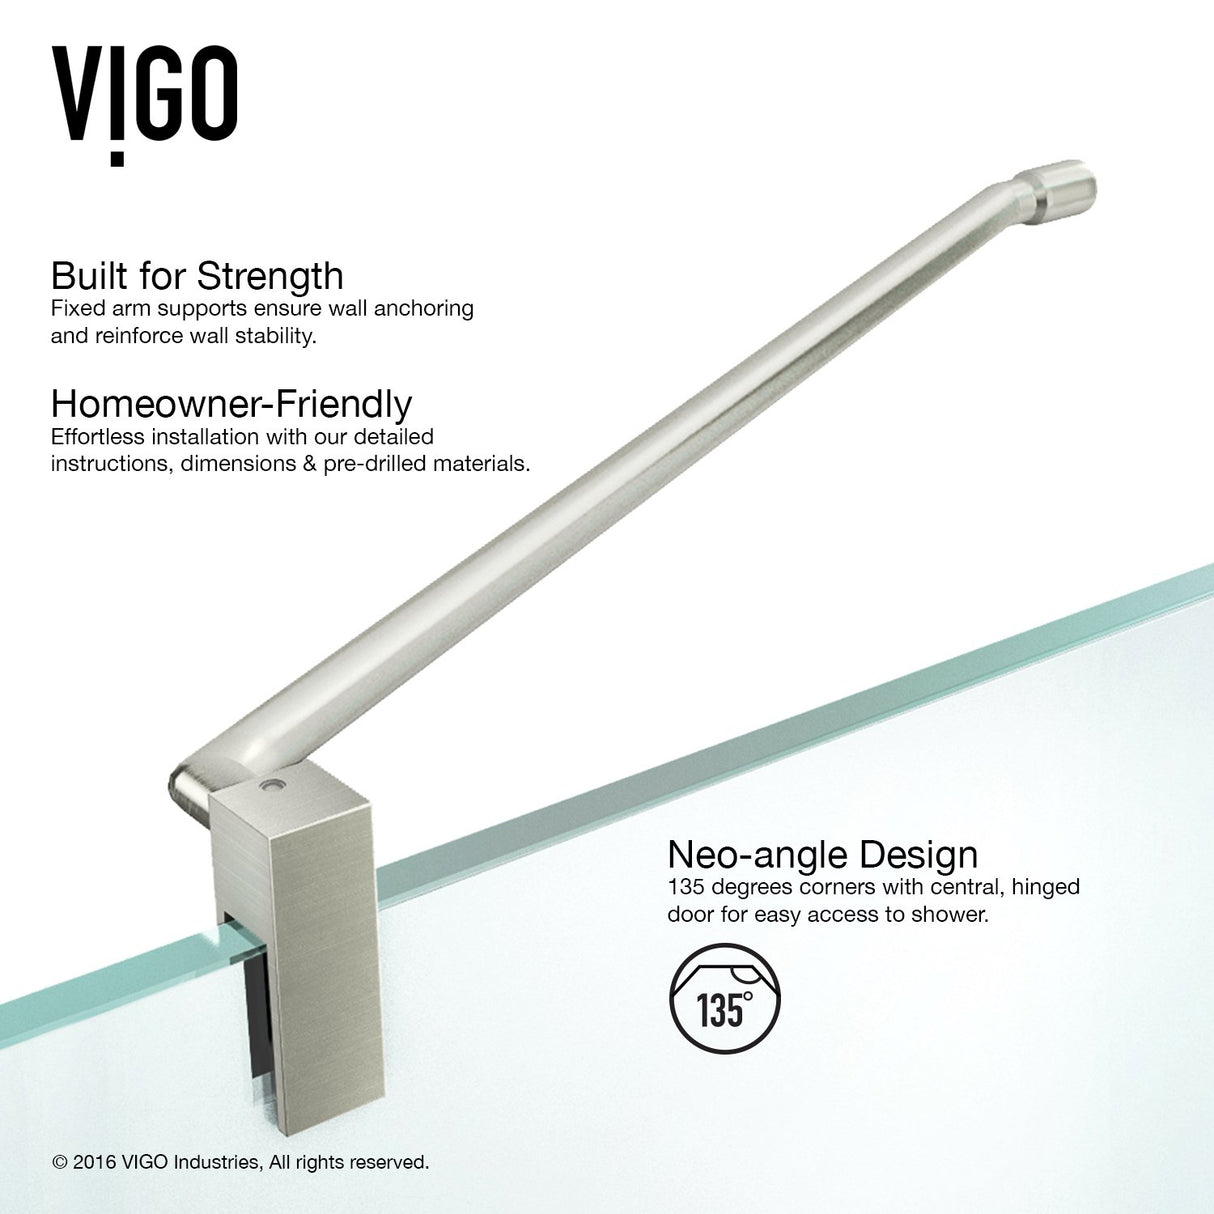 VIGO VG6062BNCL40 38.13" -38.13" W -73.38" H Frameless Hinged Neo-angle Shower Enclosure with Clear 0.38" Tempered Glass and Stainless Steel Hardware in Brushed Nickel Finish with Reversible Handle